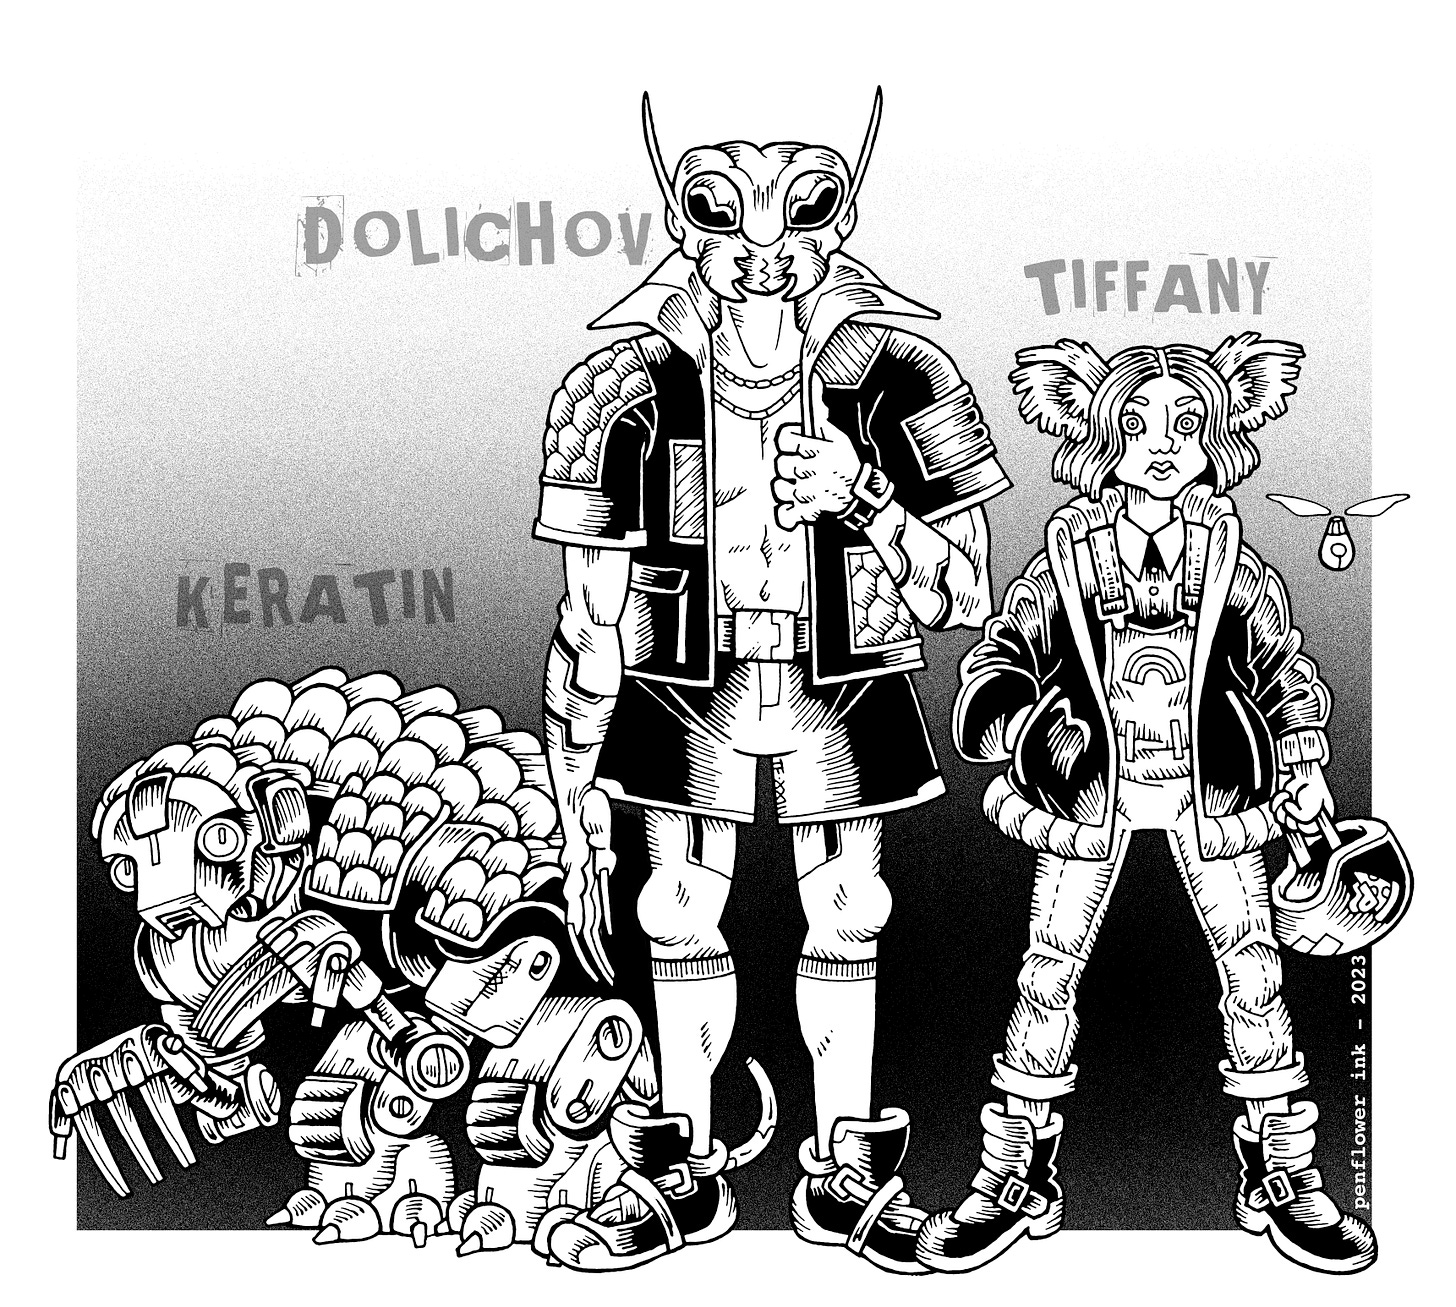 Traditionally hand-drawn black and white illustration of three cyberpunk style characters. From left to right: Keratin, Dolichov and Tiffany. Keratin is a small, bulky robot resembling a pangolin, with large claws and covered in scale-like armour plating. Dolichov is a tall, athletic human male, who has been surgically alterted to resemble a yellowjacket wasp, with large eyes, pinces and stripey markings. Tiffany is a young human female with a heart-shaped face, shoulder-length wavy hair and surgically added koala-ears. She is wearing jean dungarees under an oversized pizza delivery jacket, and holding a bike helmet. 